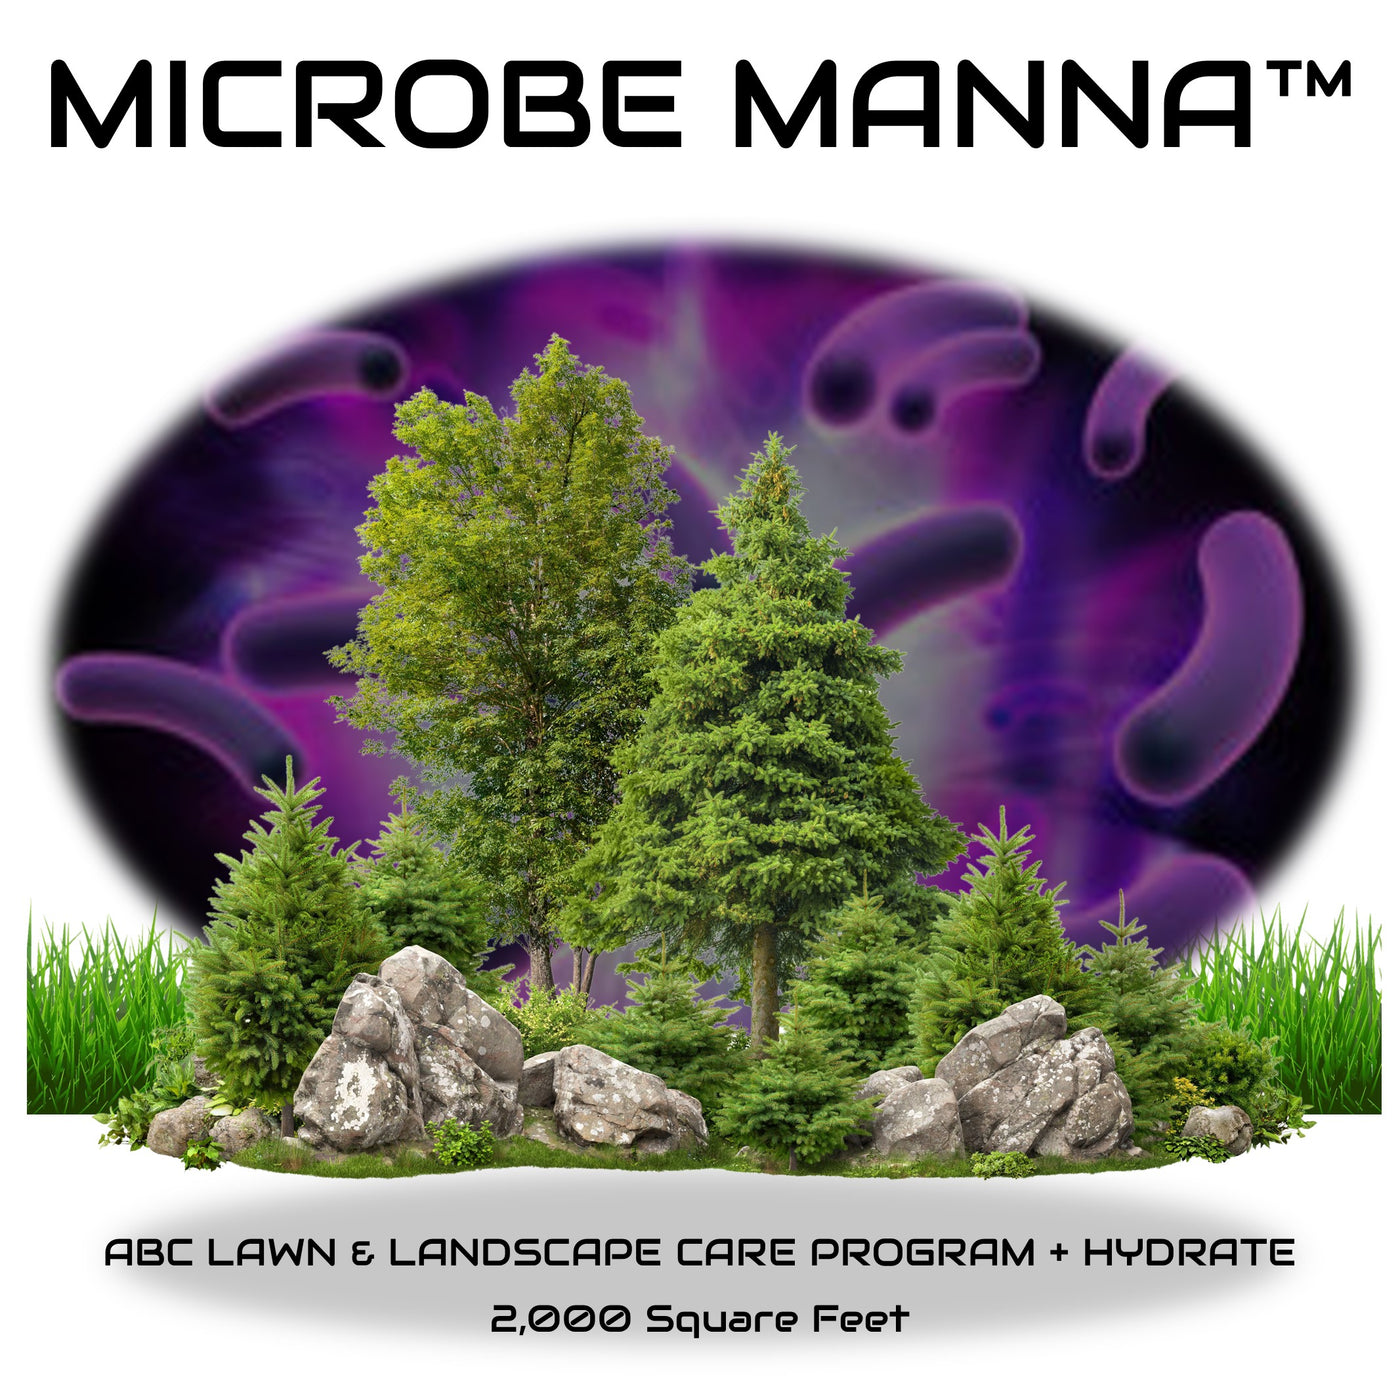 Microbe Manna ABC Lawn and Landscape Care Program and Hydrate for 2000 Square Feet